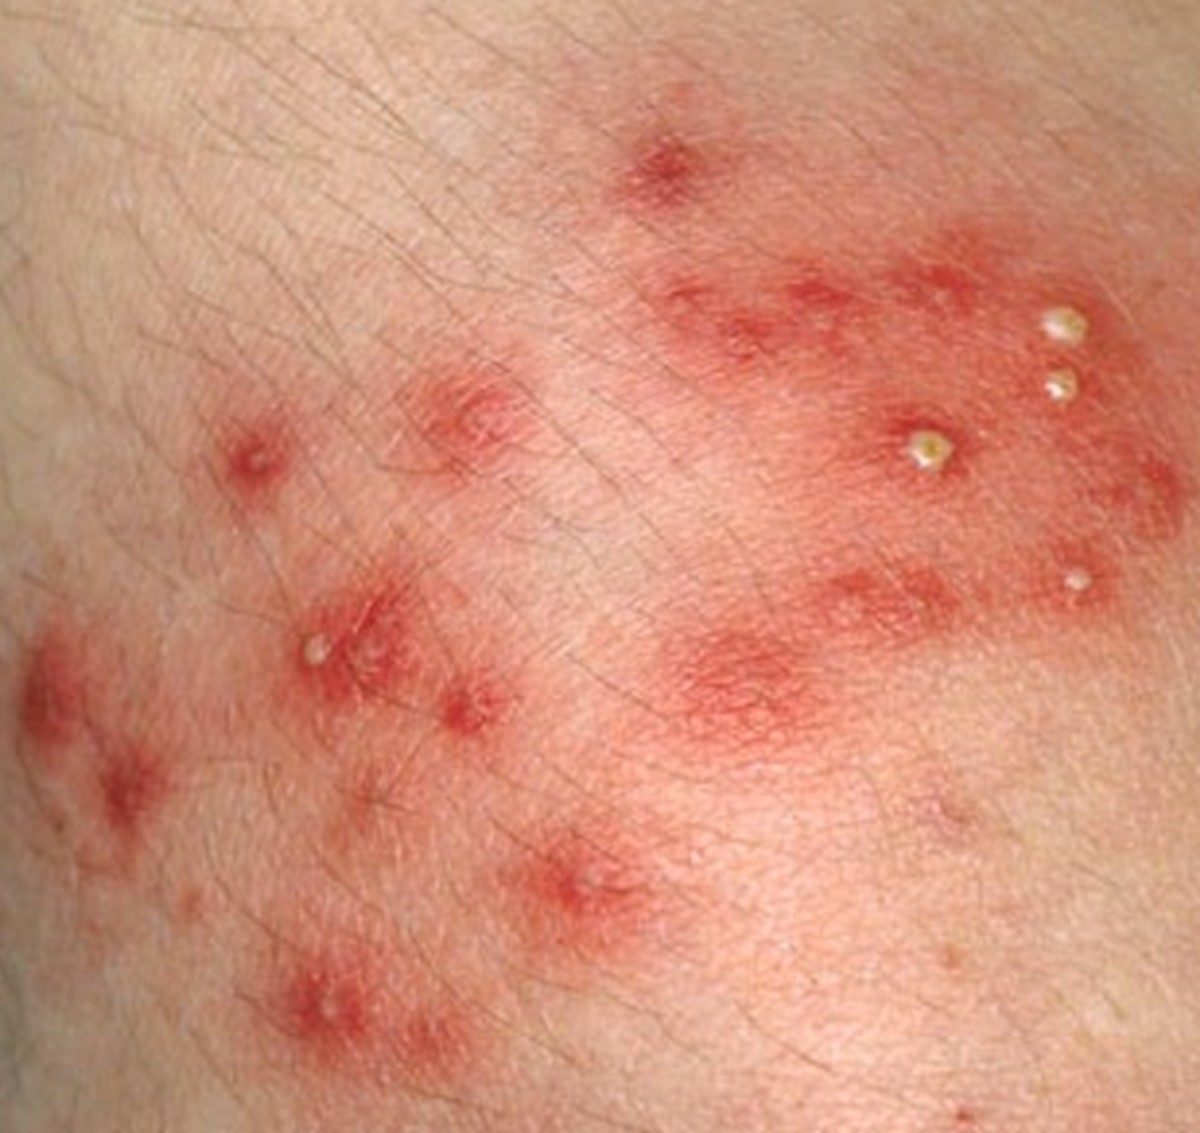 Staph Infection: Causes, Contagious, Symptoms, Treatment, and Pictures